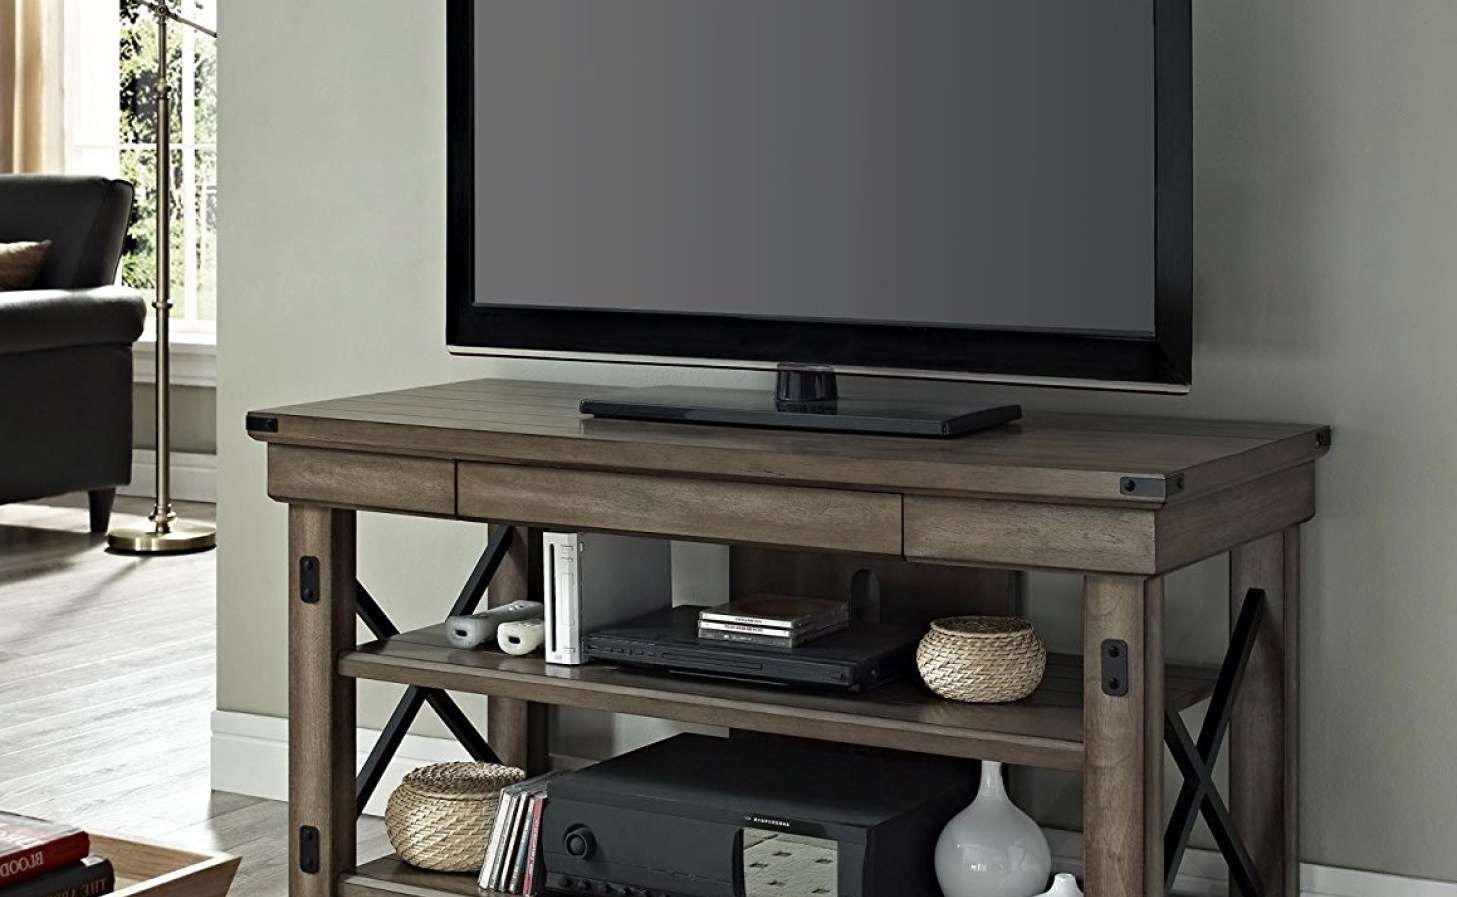 Tv : P P Wonderful Tv Stands For 70 Inch Tvs Refreshing Cheap Tv Regarding Tv Stands For 70 Inch Tvs (View 13 of 20)